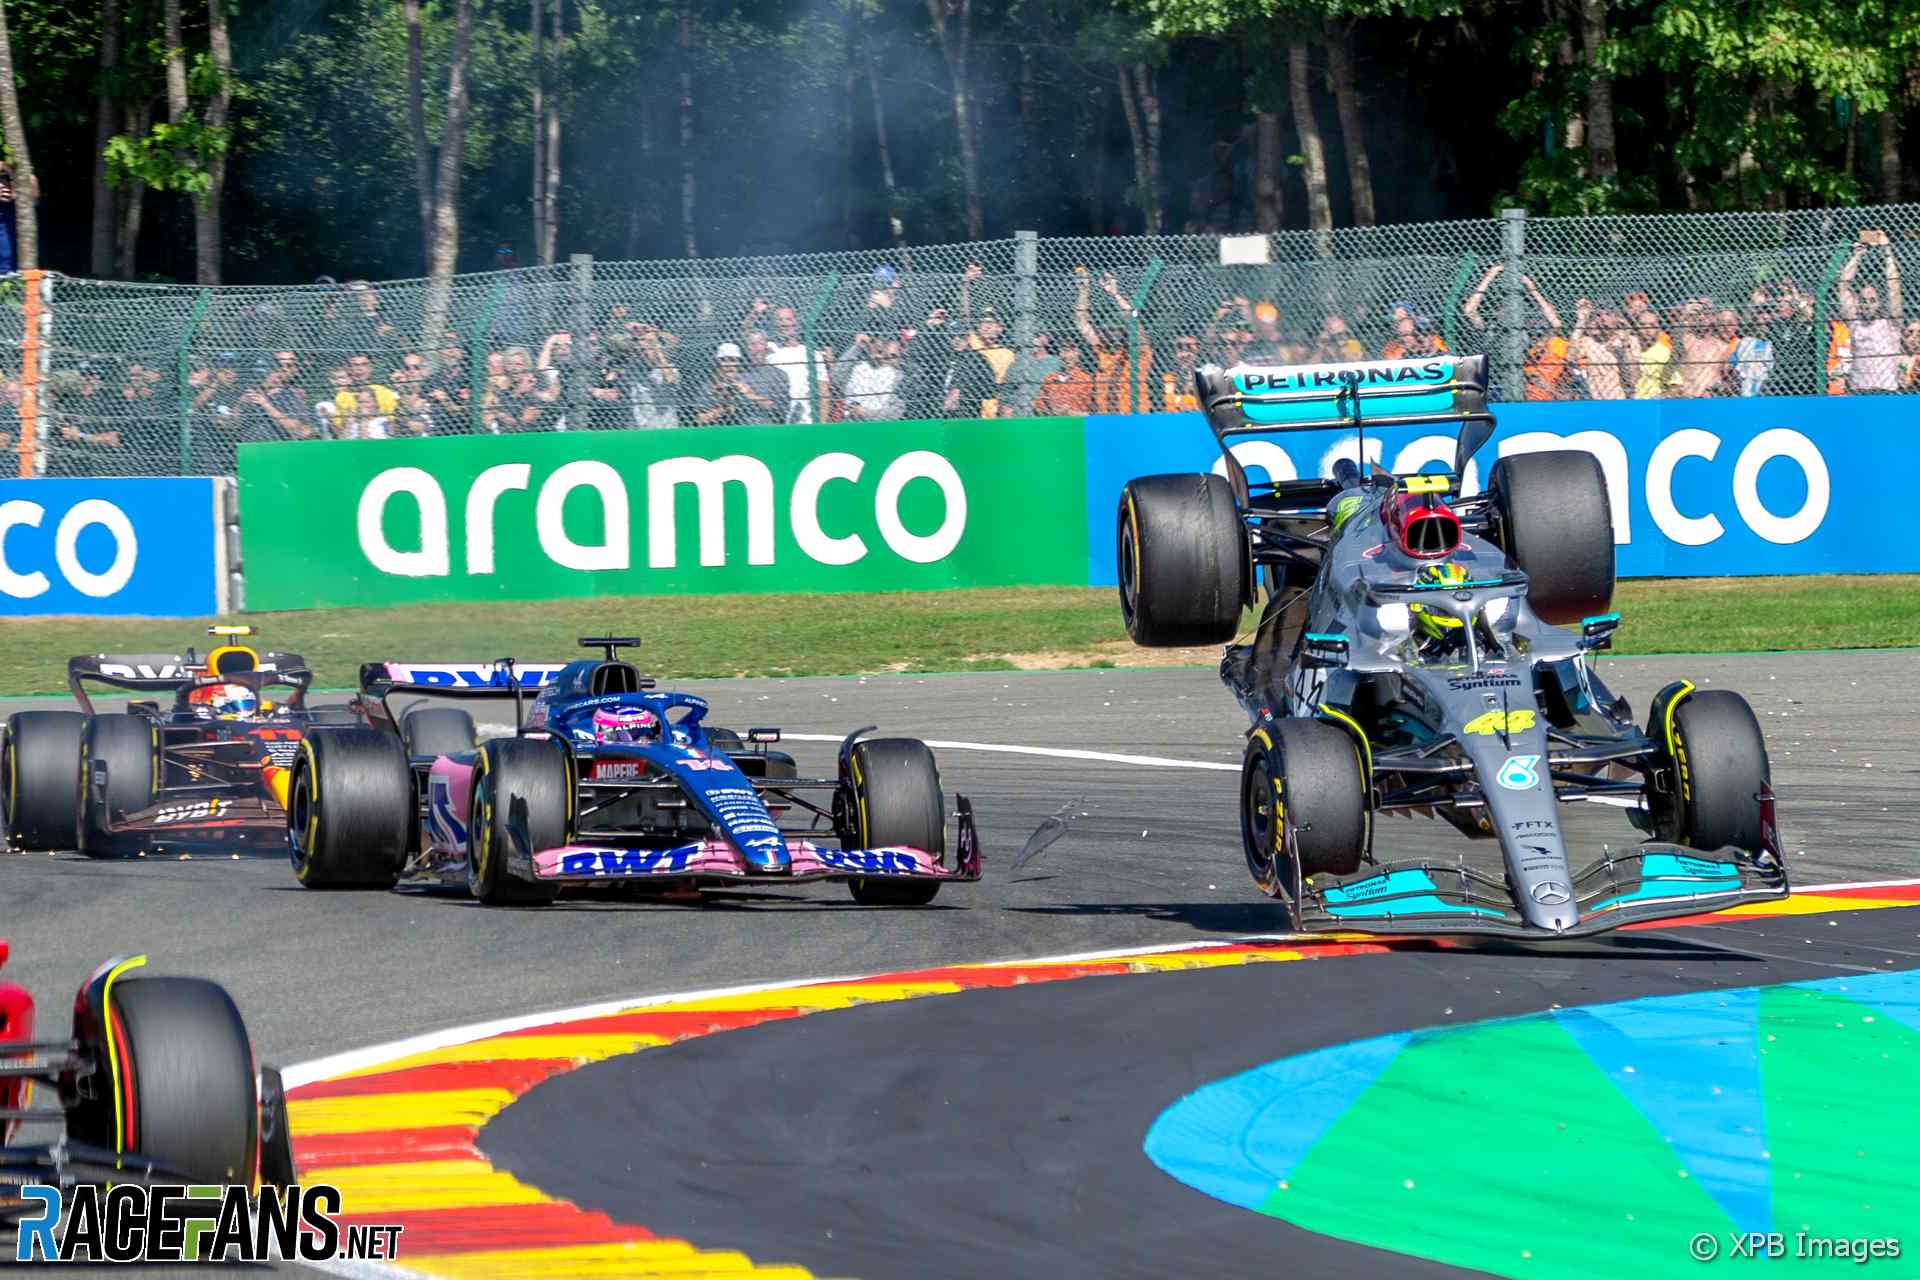 The 2022 Belgian Grand Prix was held at Spa-Francorchamps and won by Max Verstappen